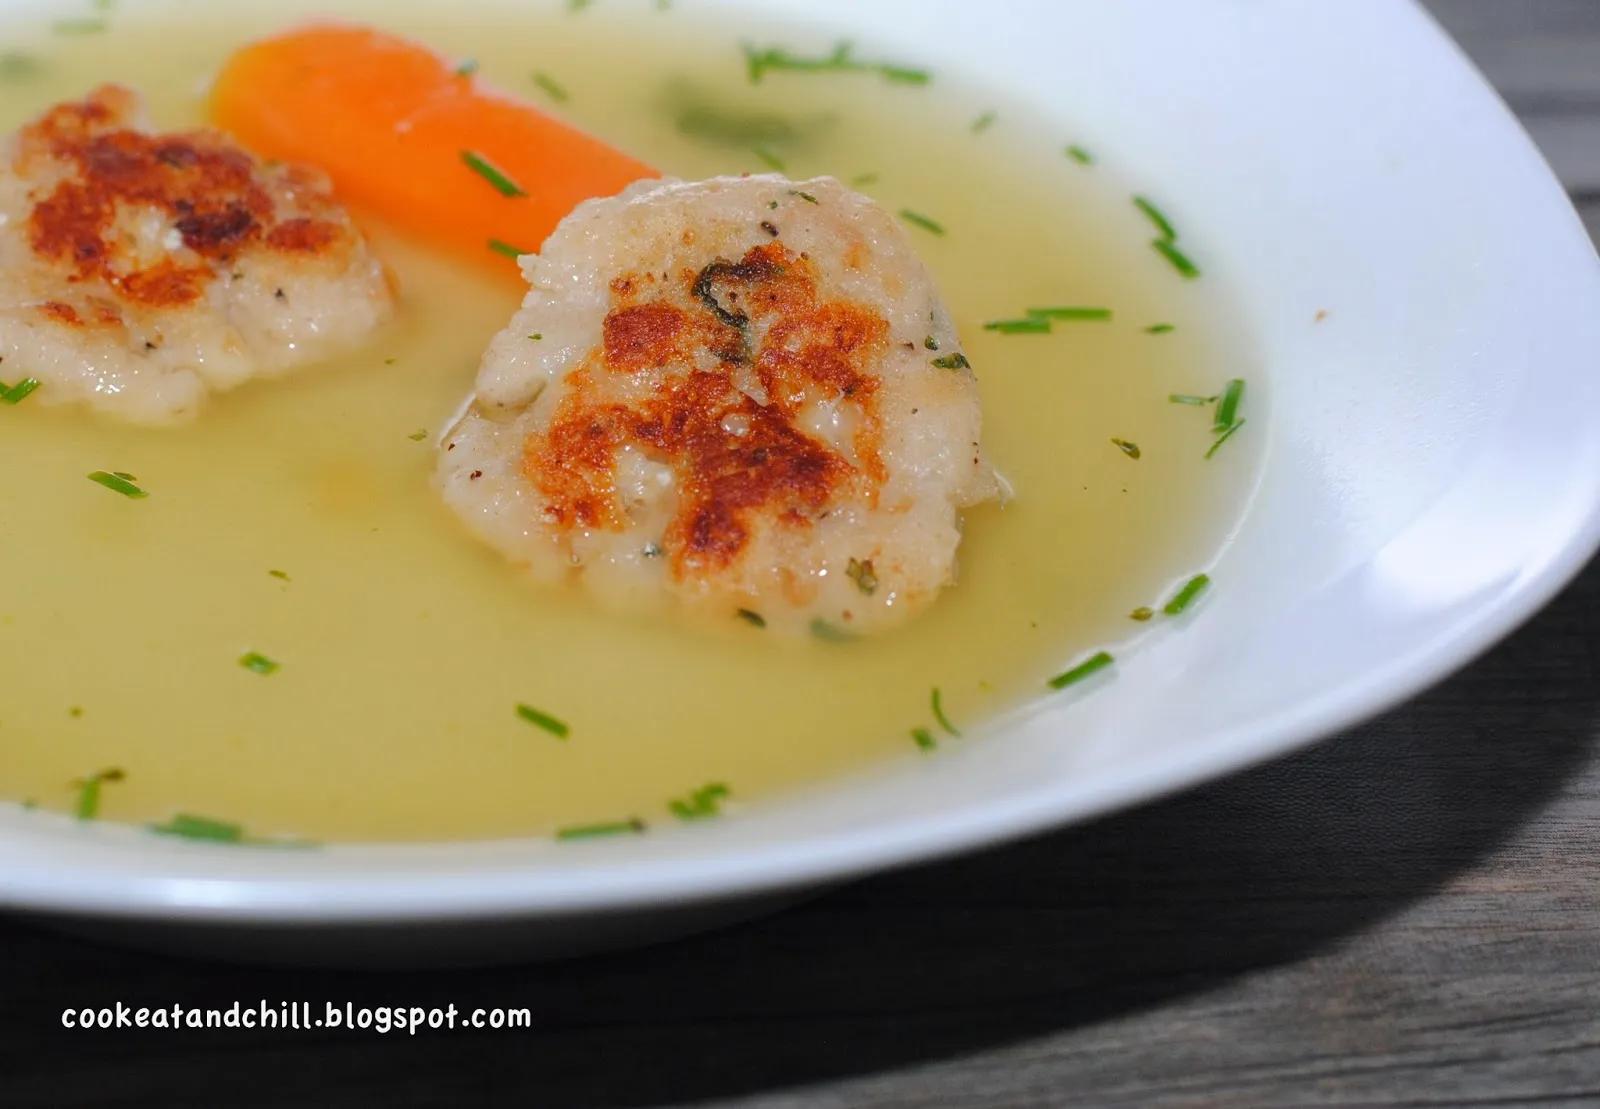 cook eat and chill(i): Kaspressknödel-Suppe